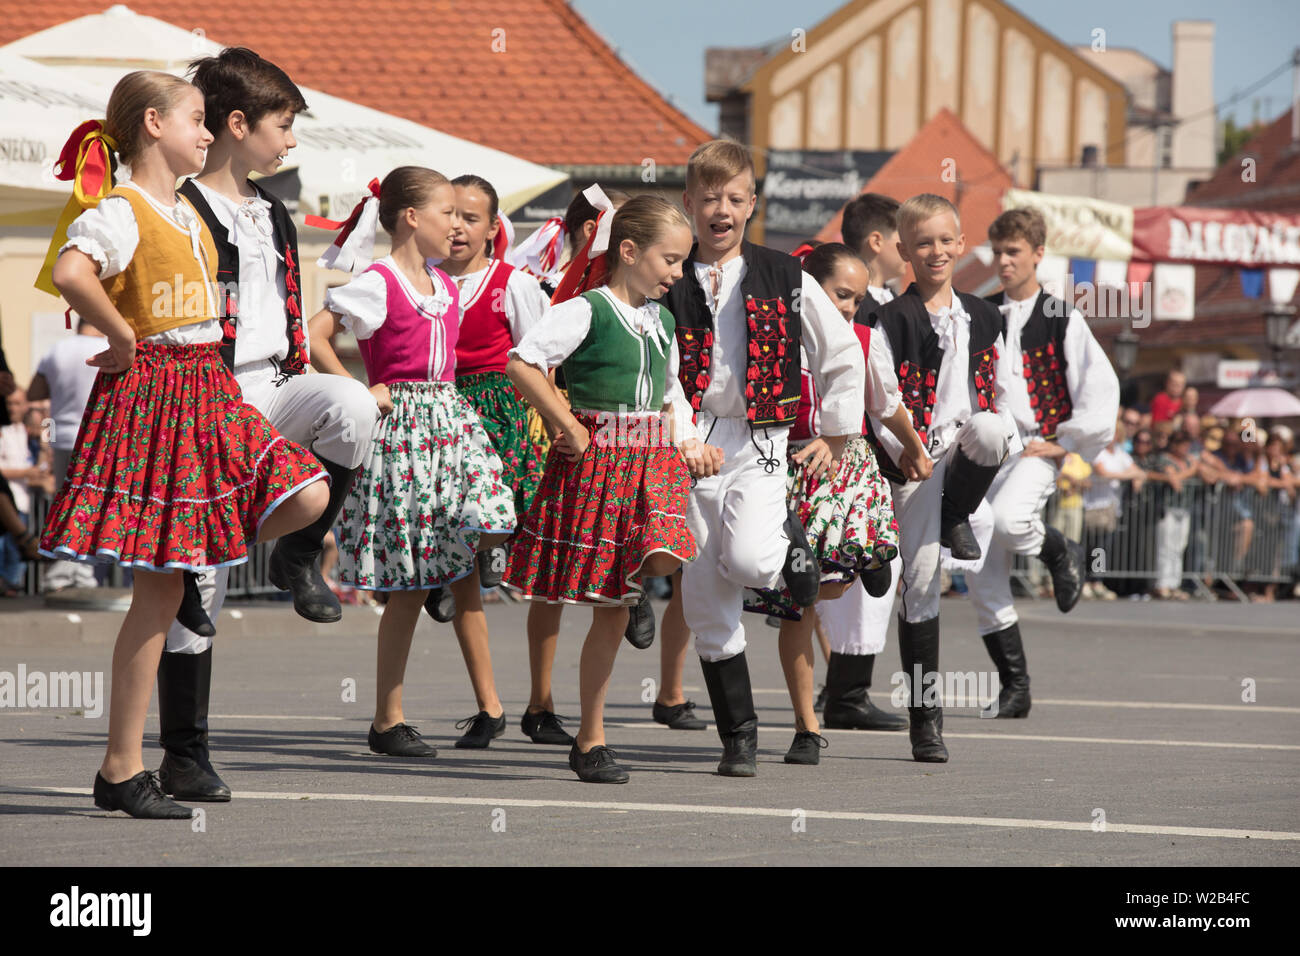 Dakovo, Croatia. 7th July, 2019. Children in traditional costumes perform during the 53rd Dakovacki vezovi festival in Dakovo, Croatia, on July 7, 2019. Dakovacki vezovi festival, one of the major cultural events in Croatia, presents traditional costumes and performances. Credit: Dubravka Petric/Xinhua/Alamy Live News Stock Photo